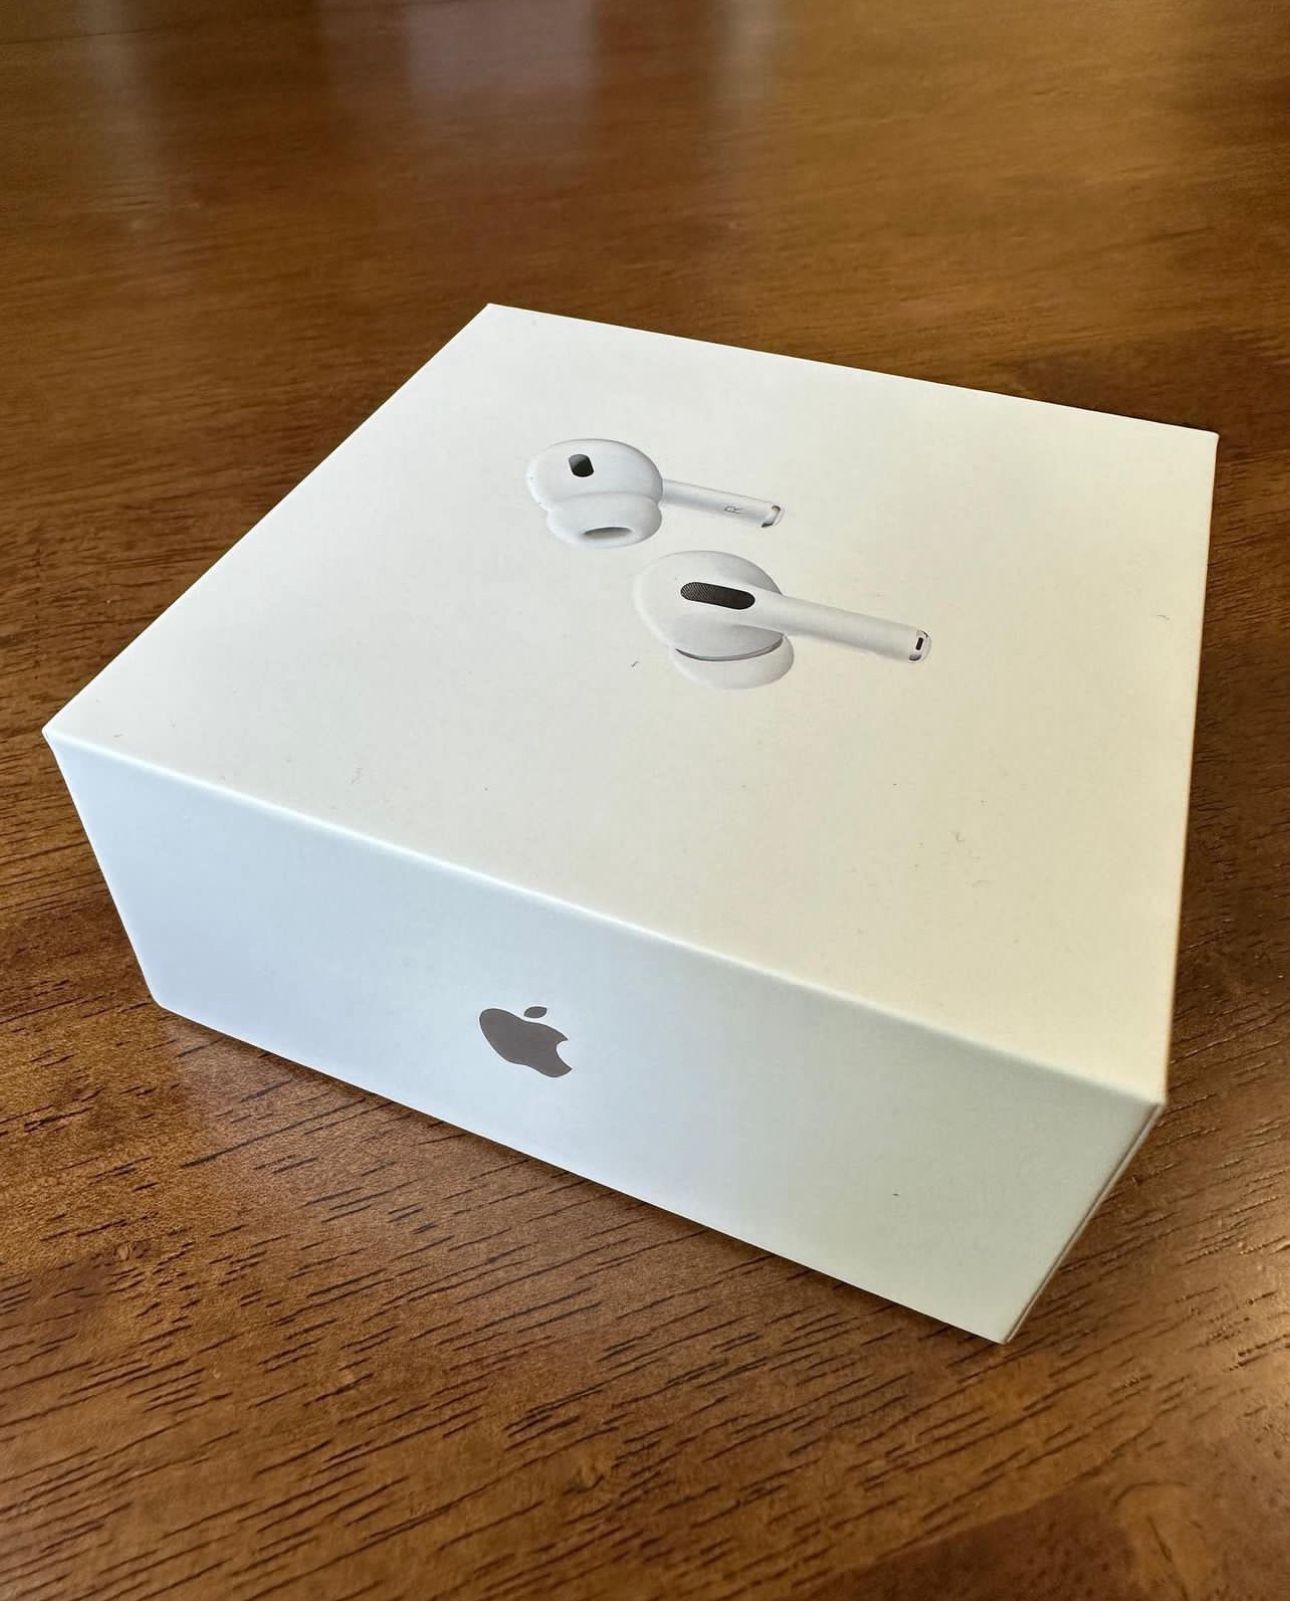 Airpod Pro (2nd Gen) with MagSafe case